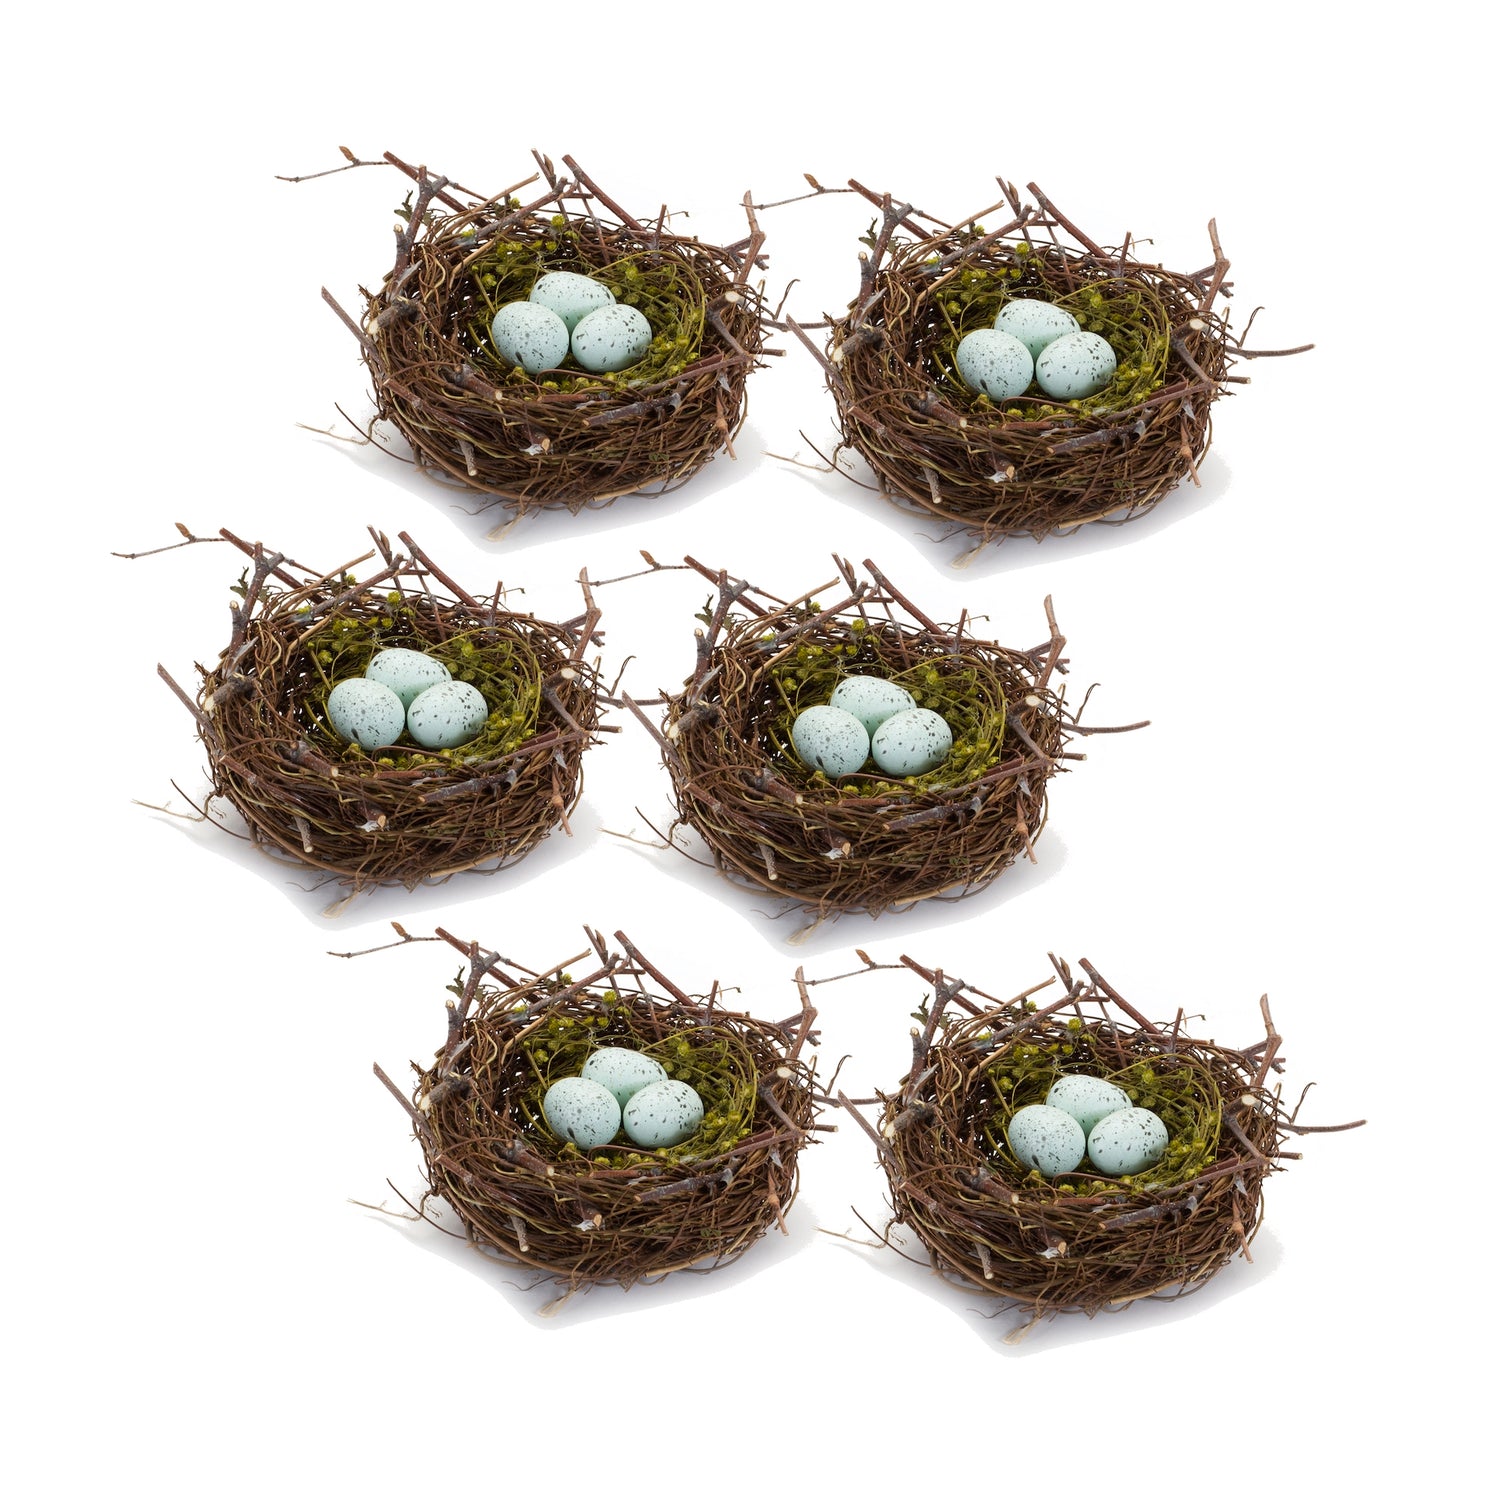 Nest with Eggs (Set of 6) 6.5"D x 3"H Natural/Foam